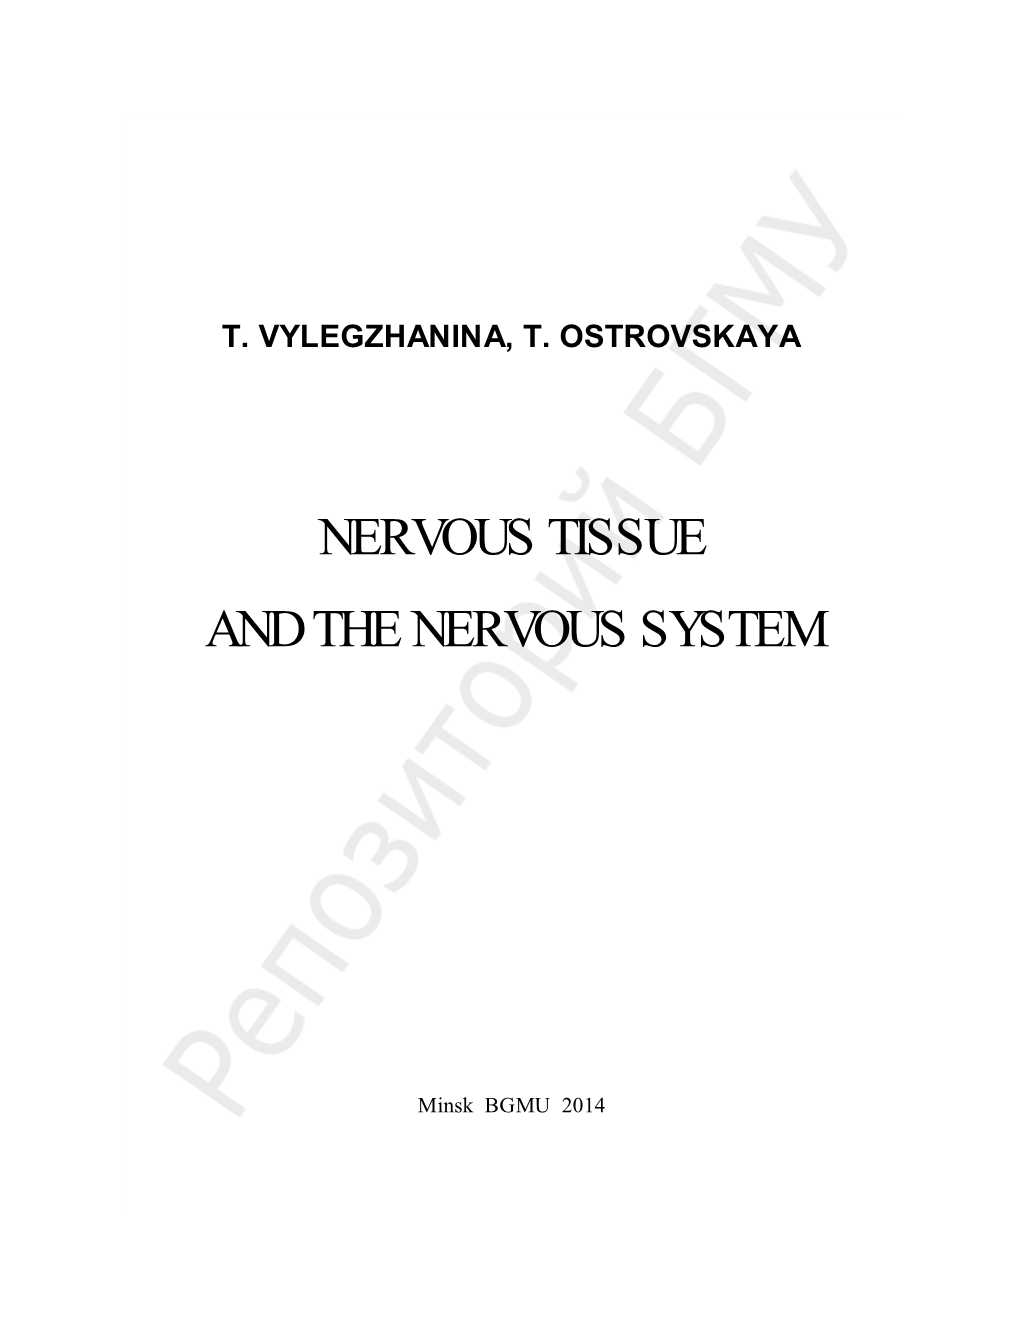 Nervous Tissue and the Nervous System